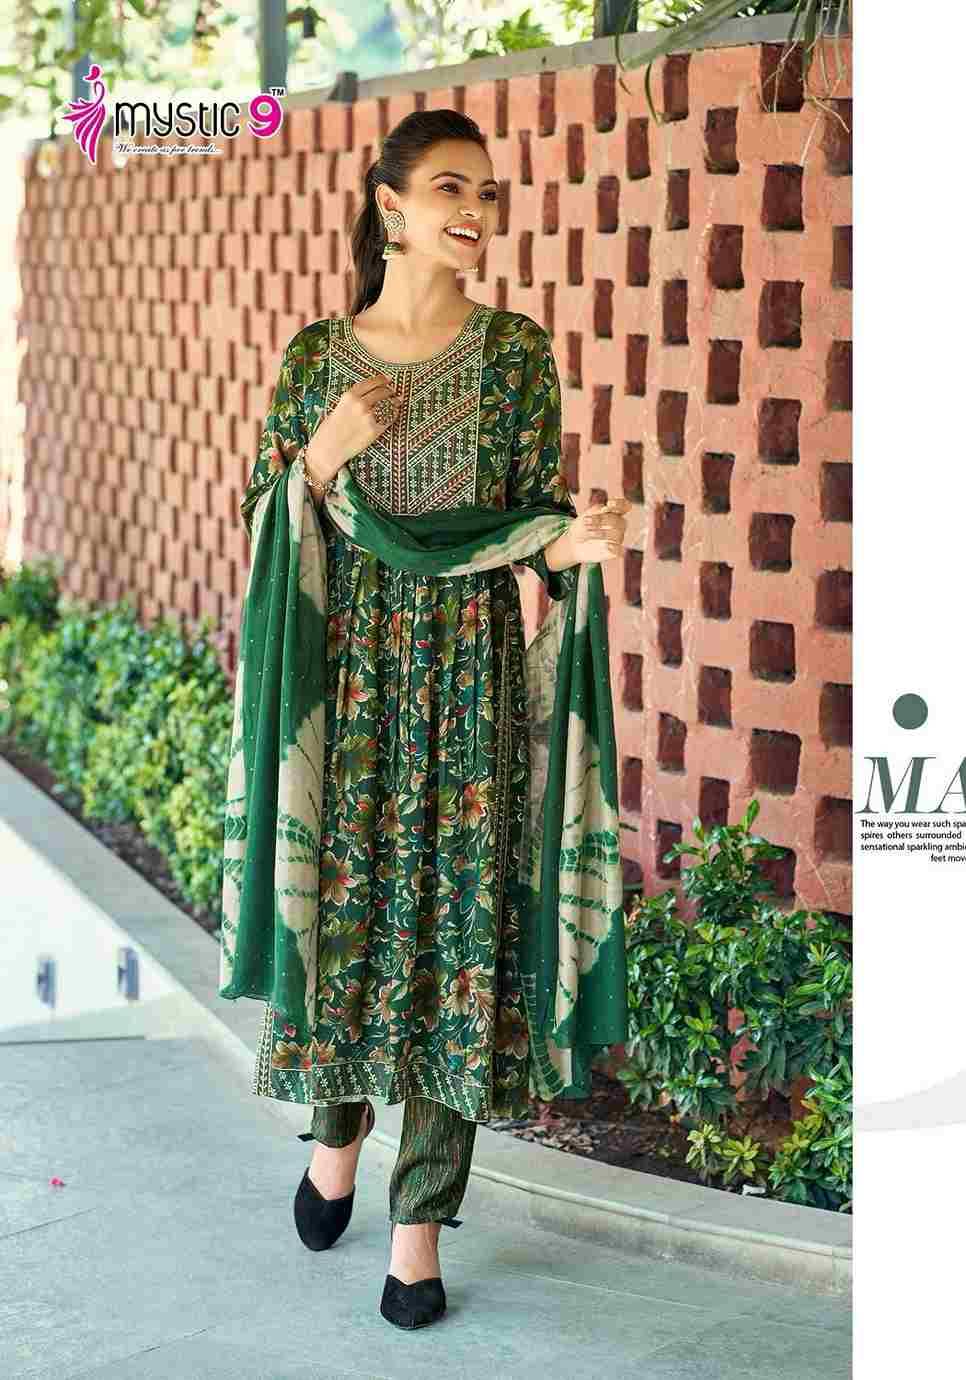 Black Beauty By Mystic 9 1001 To 1008 Series Beautiful Suits Colorful Stylish Fancy Casual Wear & Ethnic Wear Rayon Foil Print Dresses At Wholesale Price